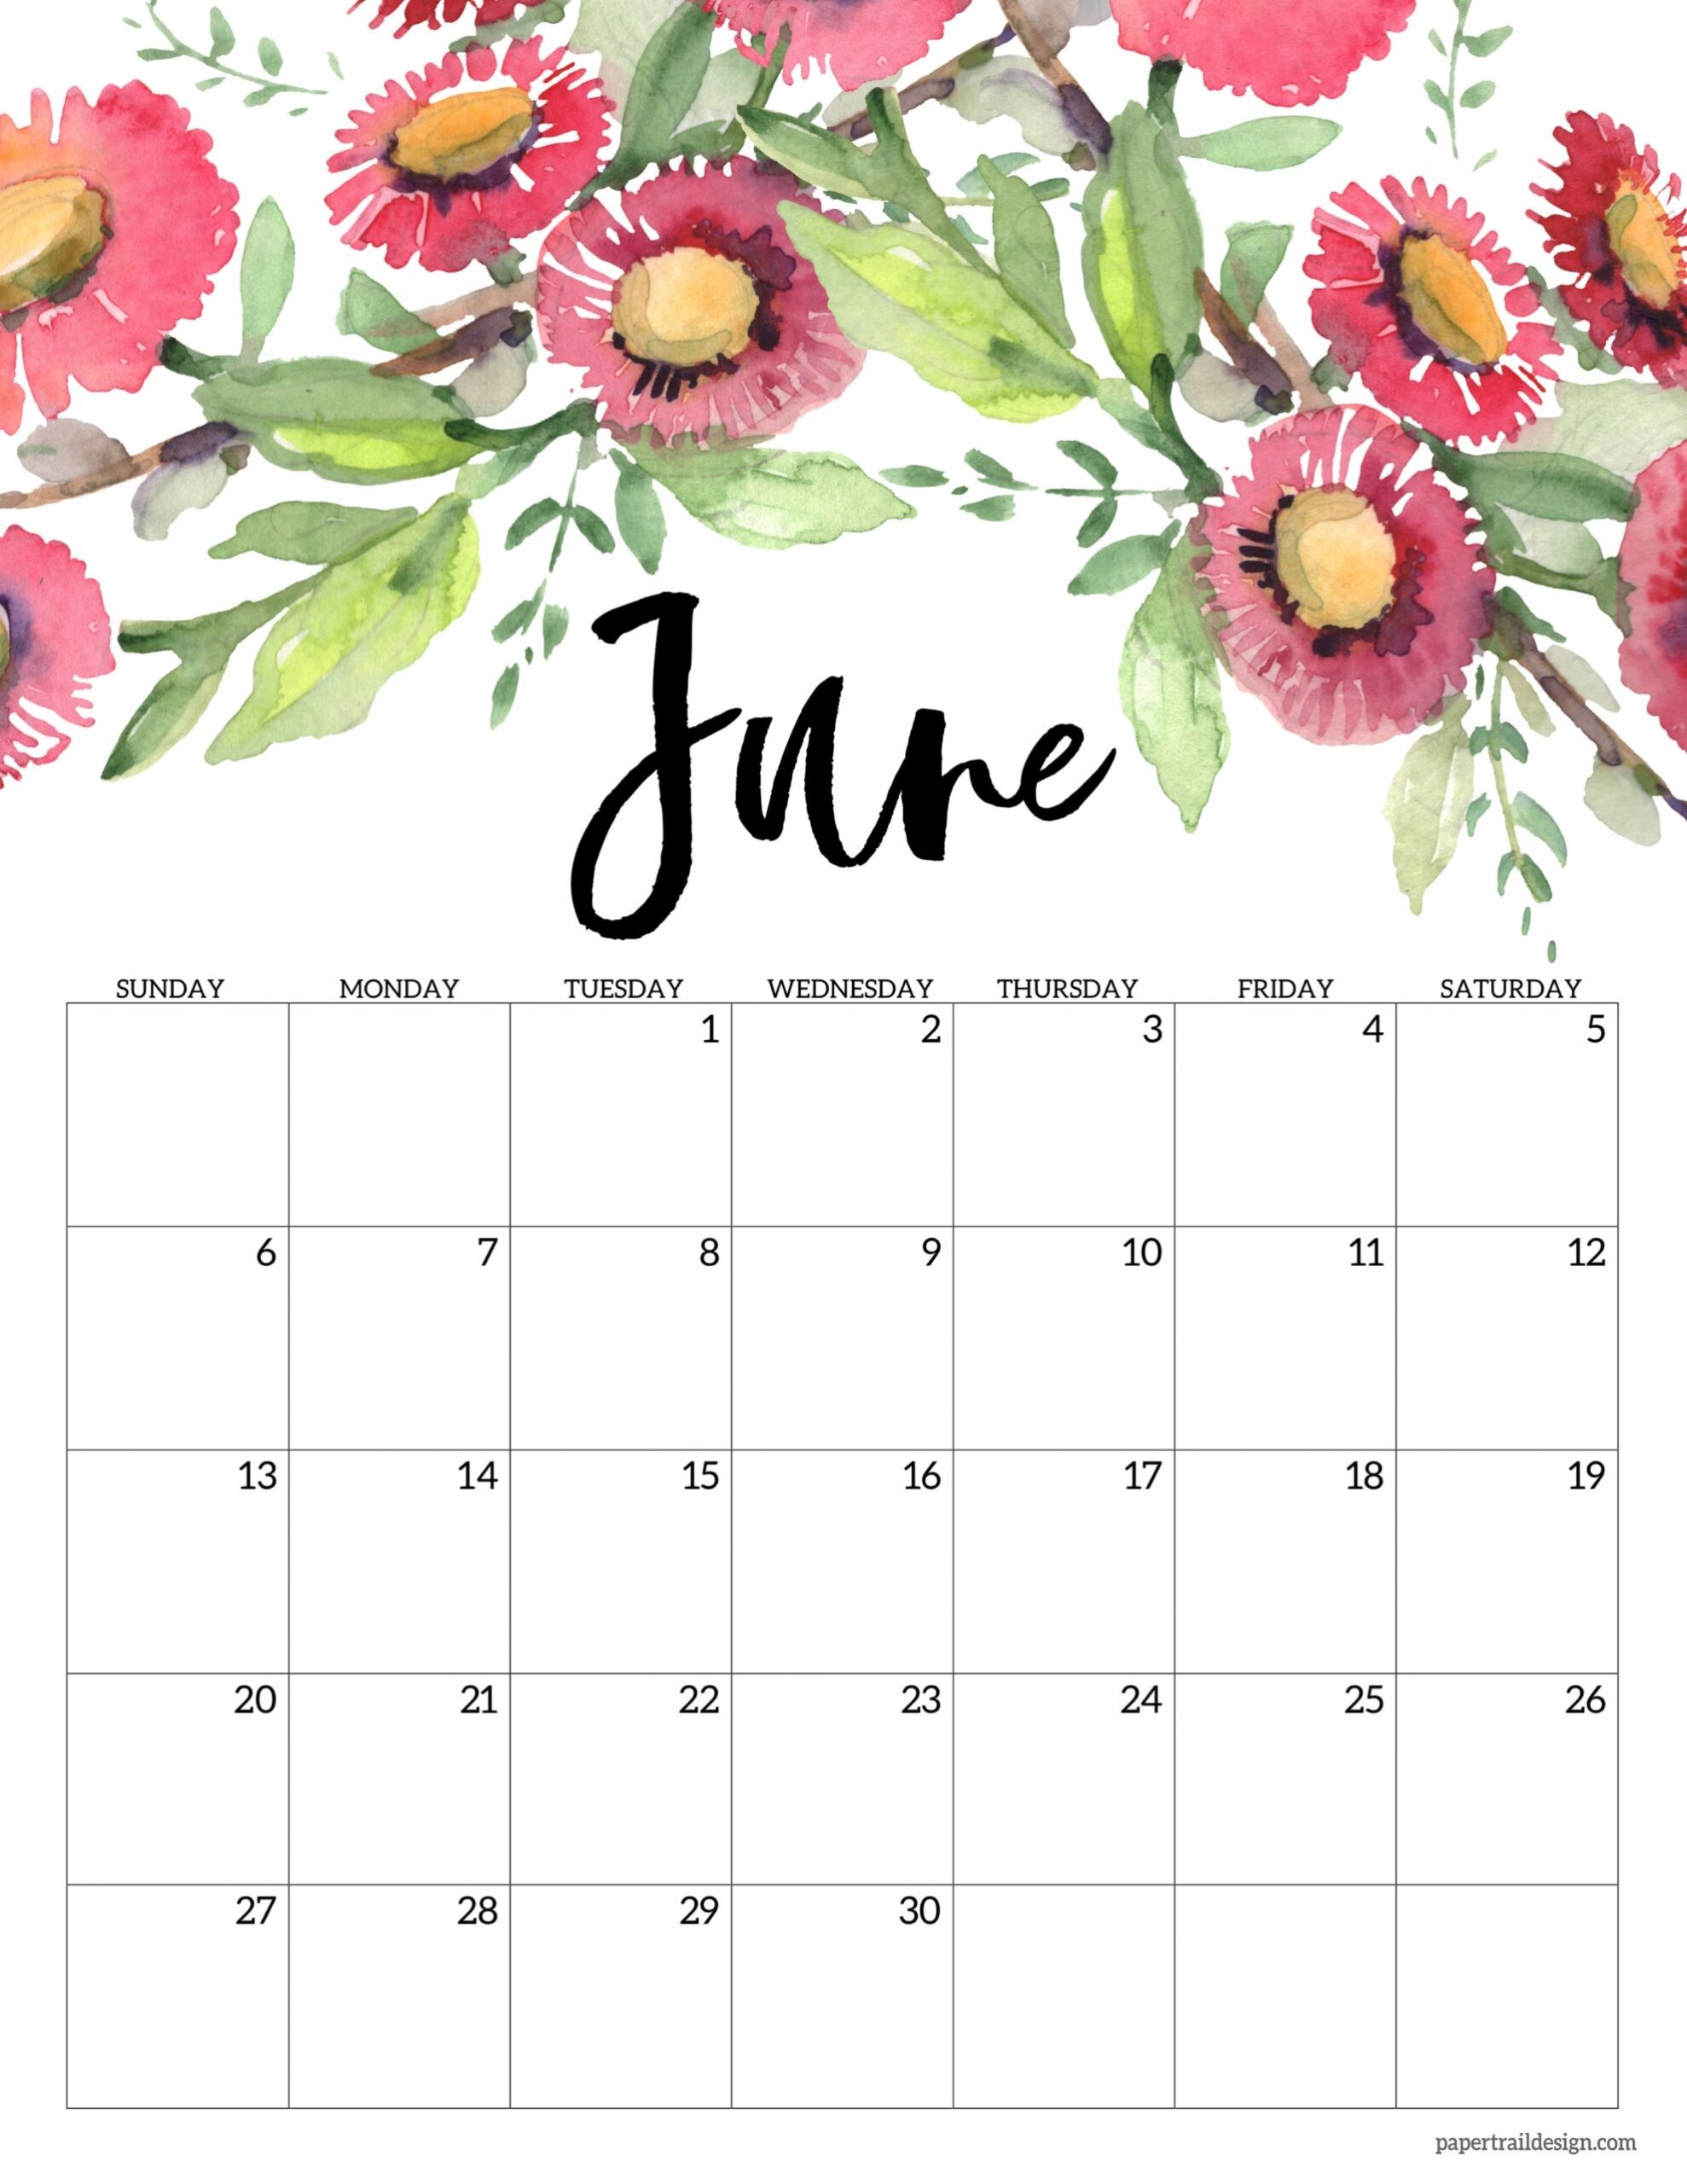 Catch August 2021 Printable Calendar With Flowers